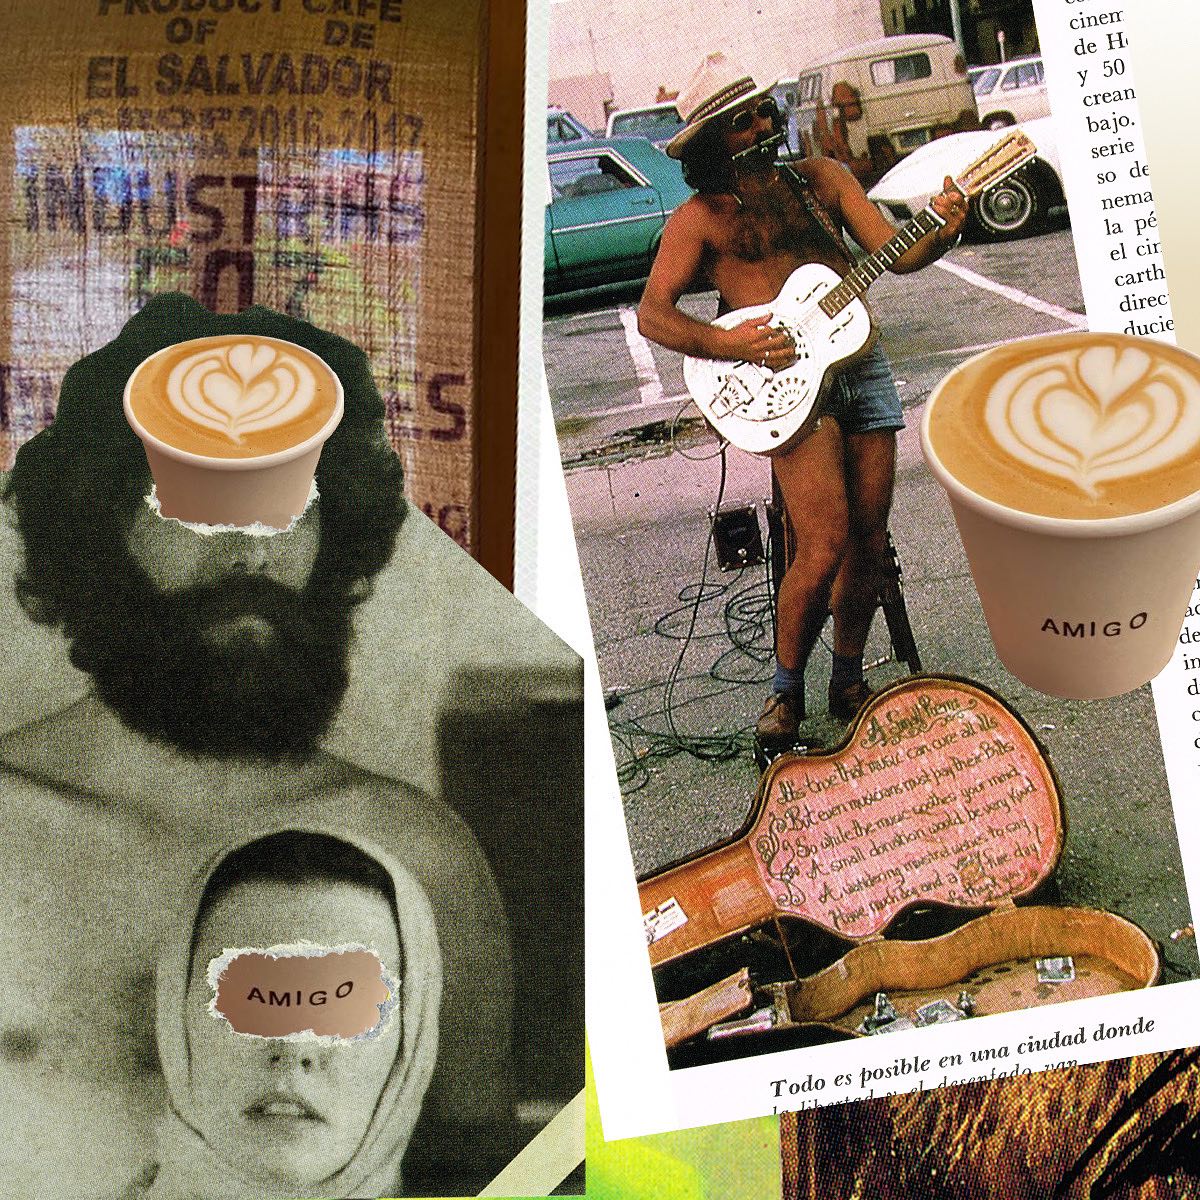 graphic art of artist and coffee